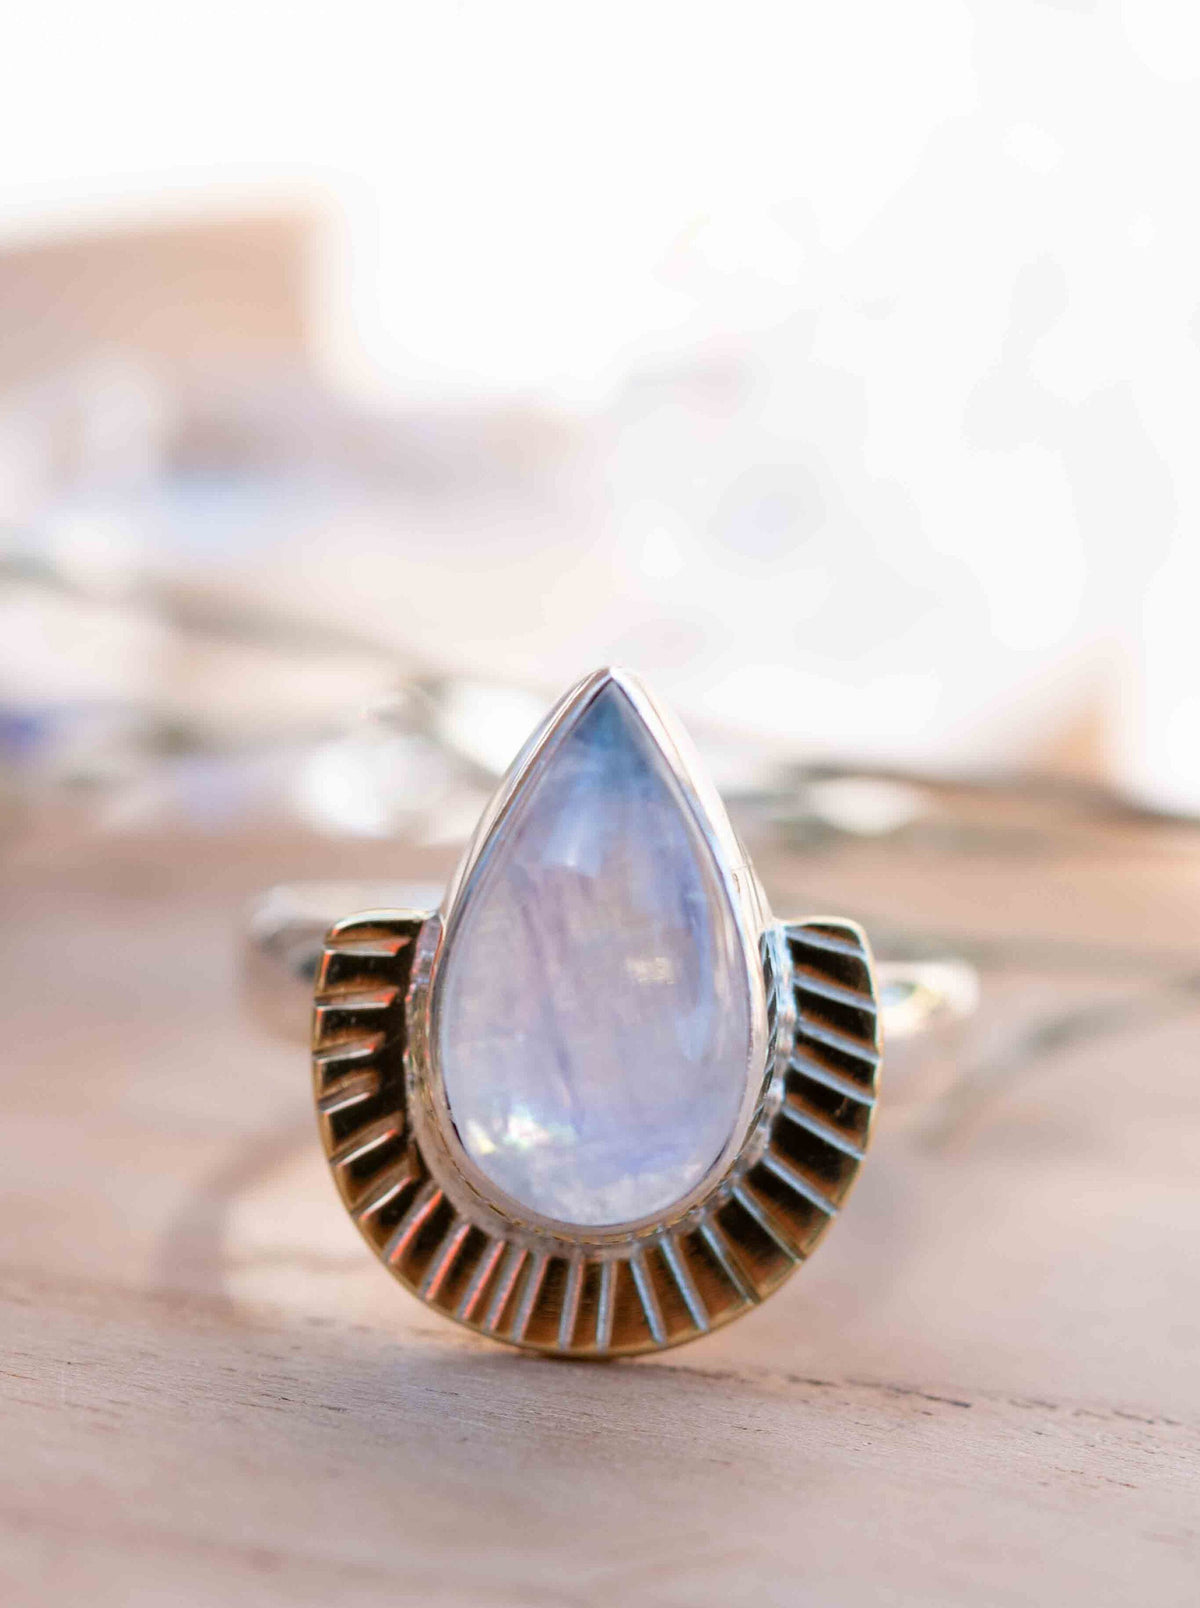 Moonstone Ring * Sterling Silver and Brass * Filigree * Handmade * Gemstone * Statement * Jewelry * Bycila * Gift For Her * BJR196